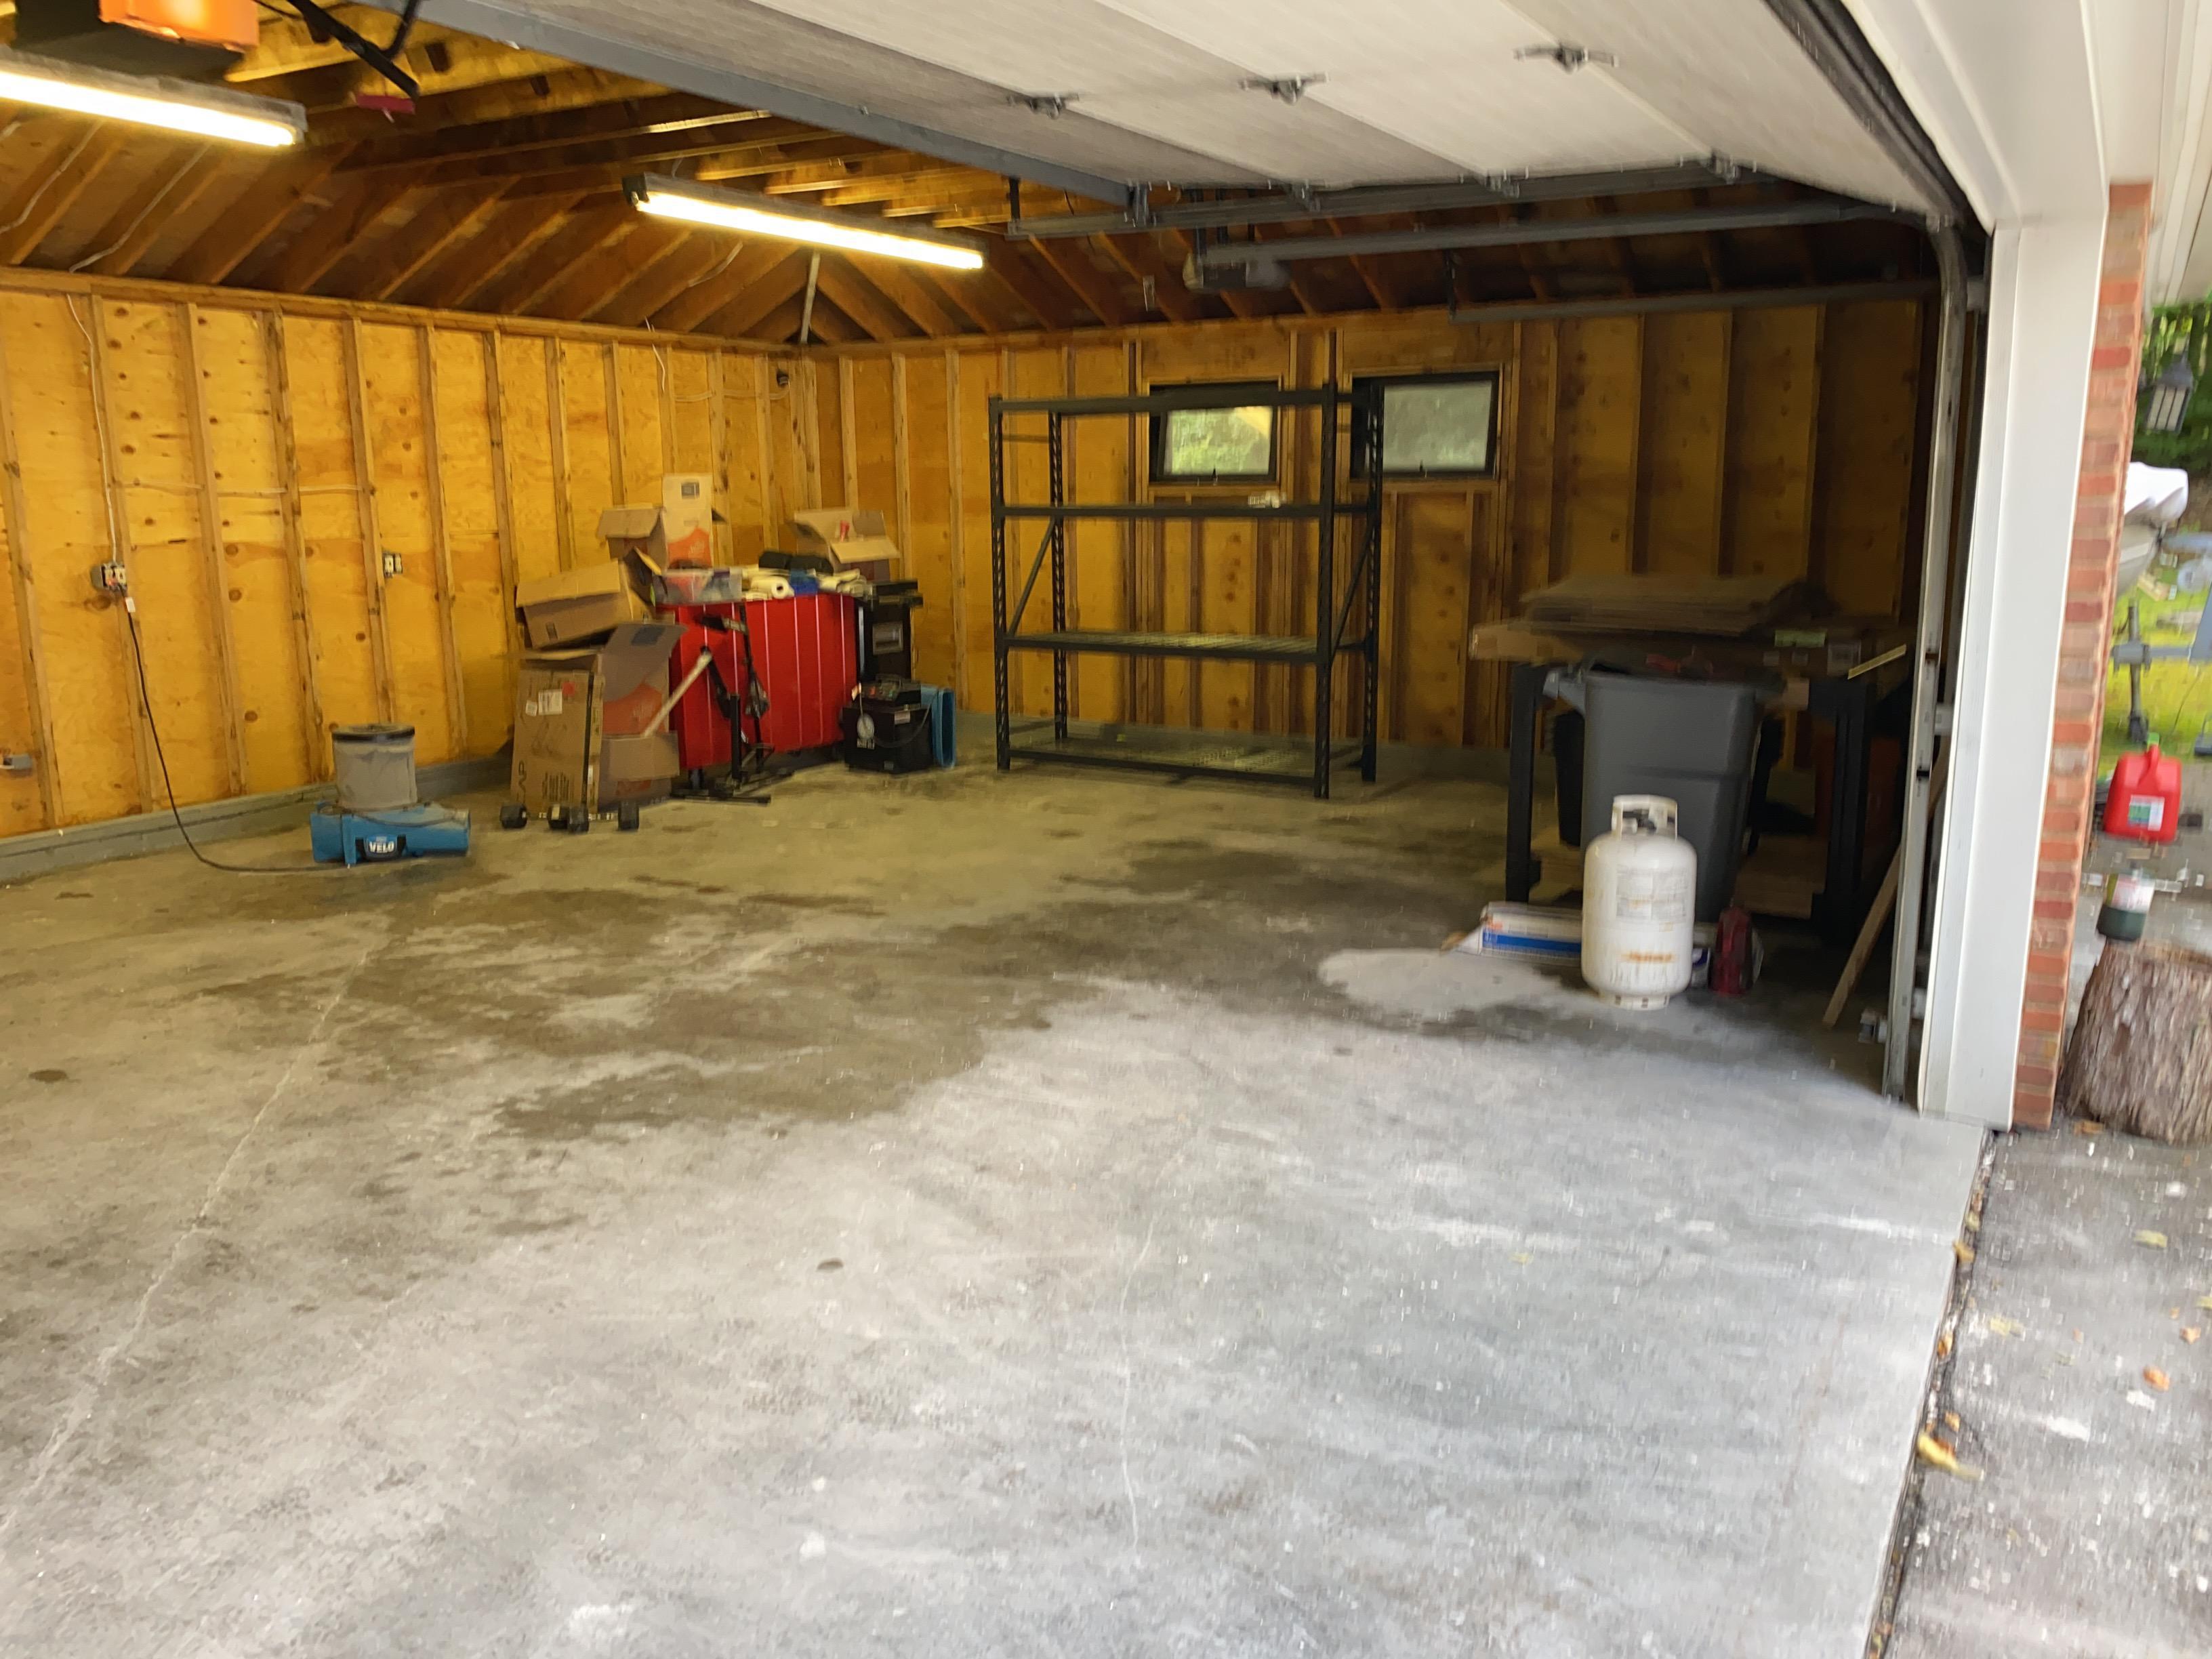 Garage cleaned up